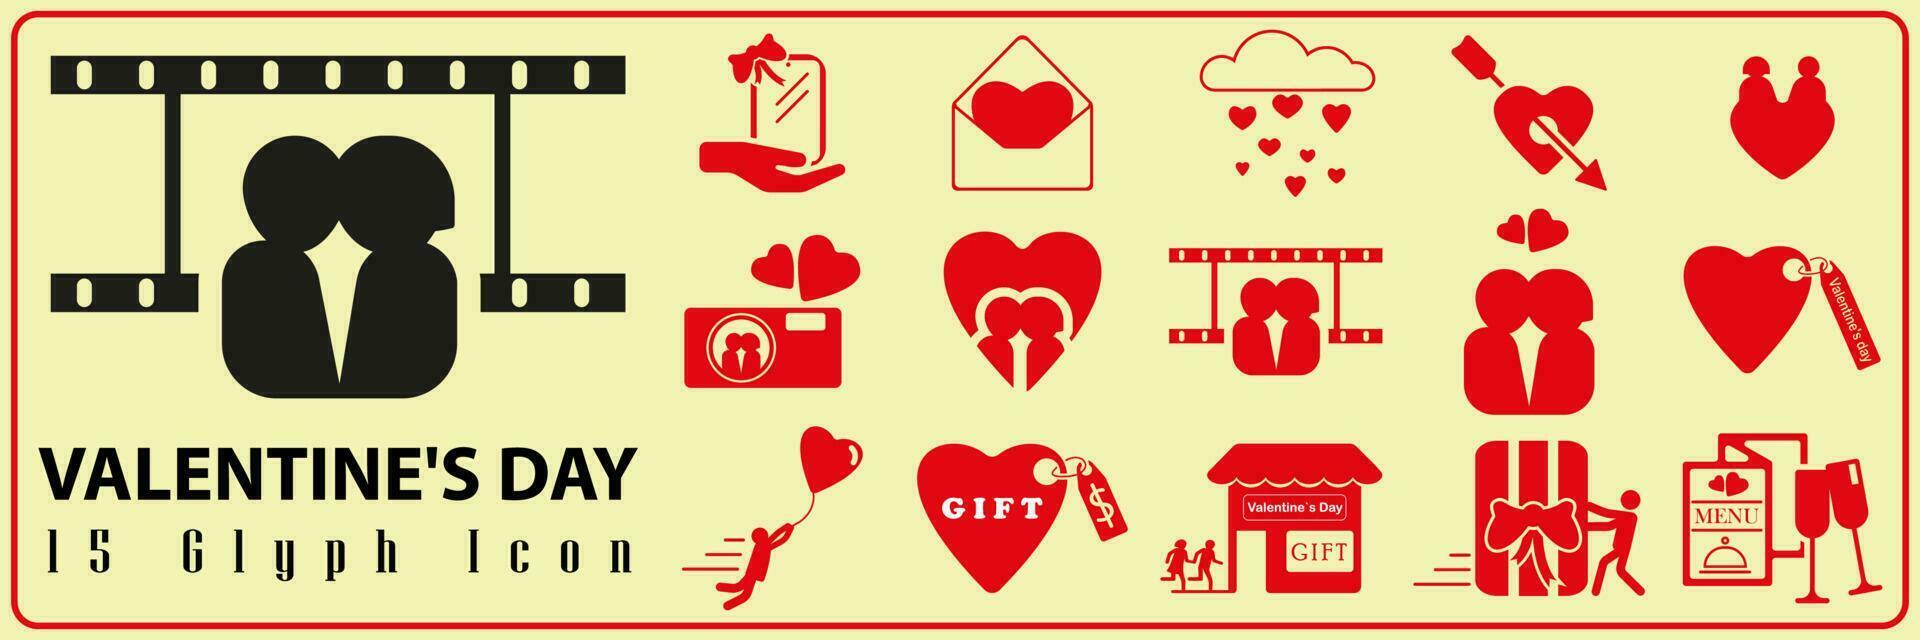 Set of cute vector love icon. Collection of scrapbooking design elements for valentines day heart, holiday gift, ice cream. Romantic red and pink glyph vector.